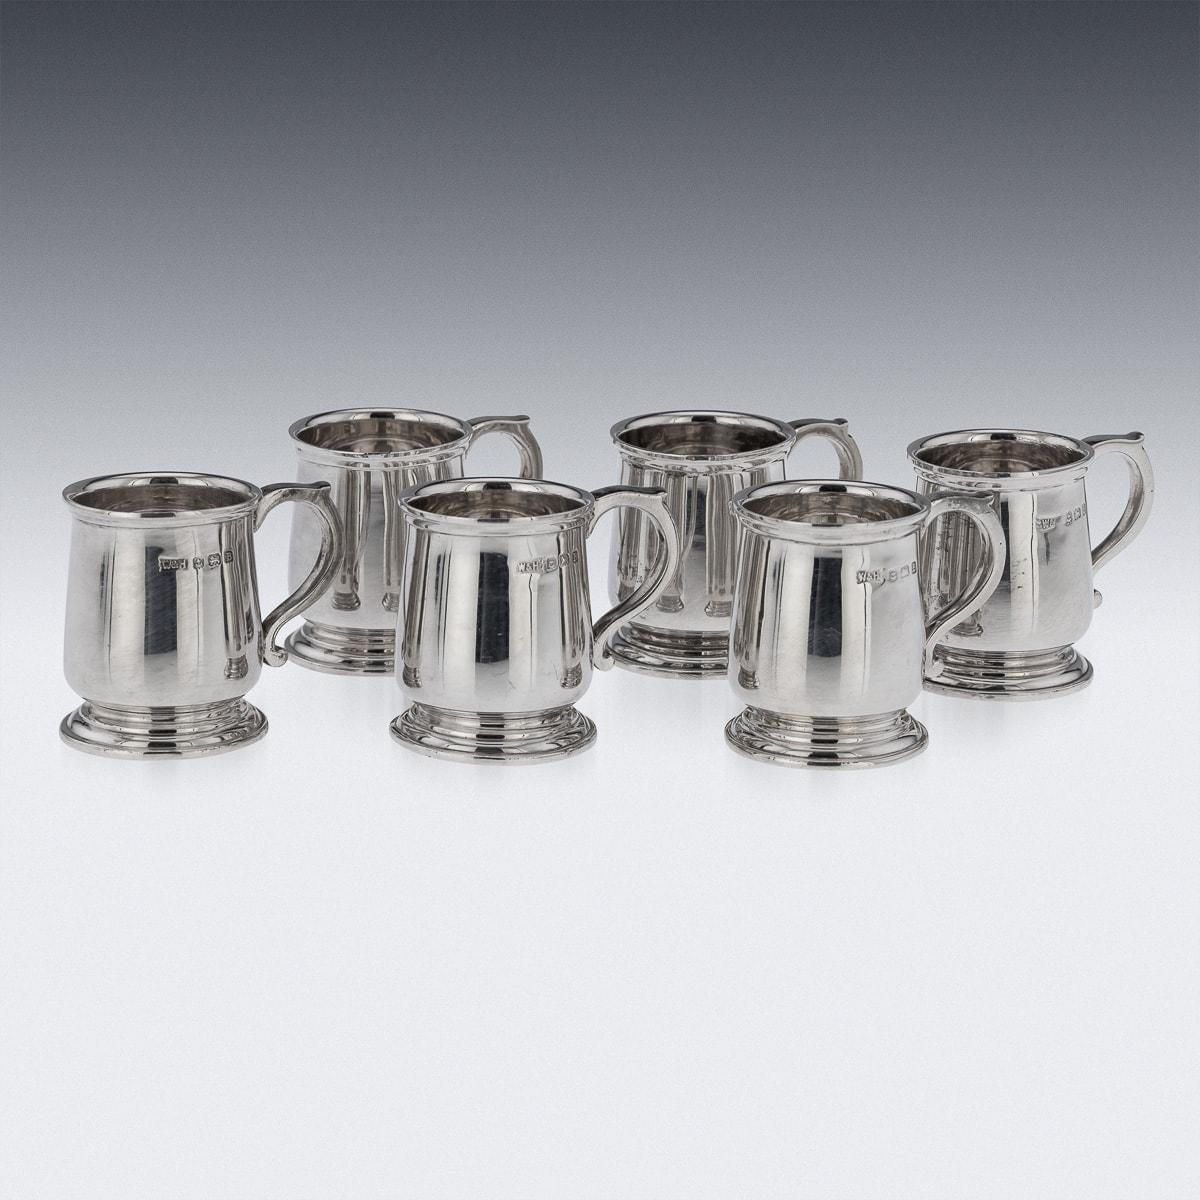 Antique 19th Century Victorian solid silver set of 6 shot tankards. These tankards have a tapering cylindrical form as well as two broad bands of decoration surrounding the entire body. Each mug is fitted with a plain C shaped handle which has a